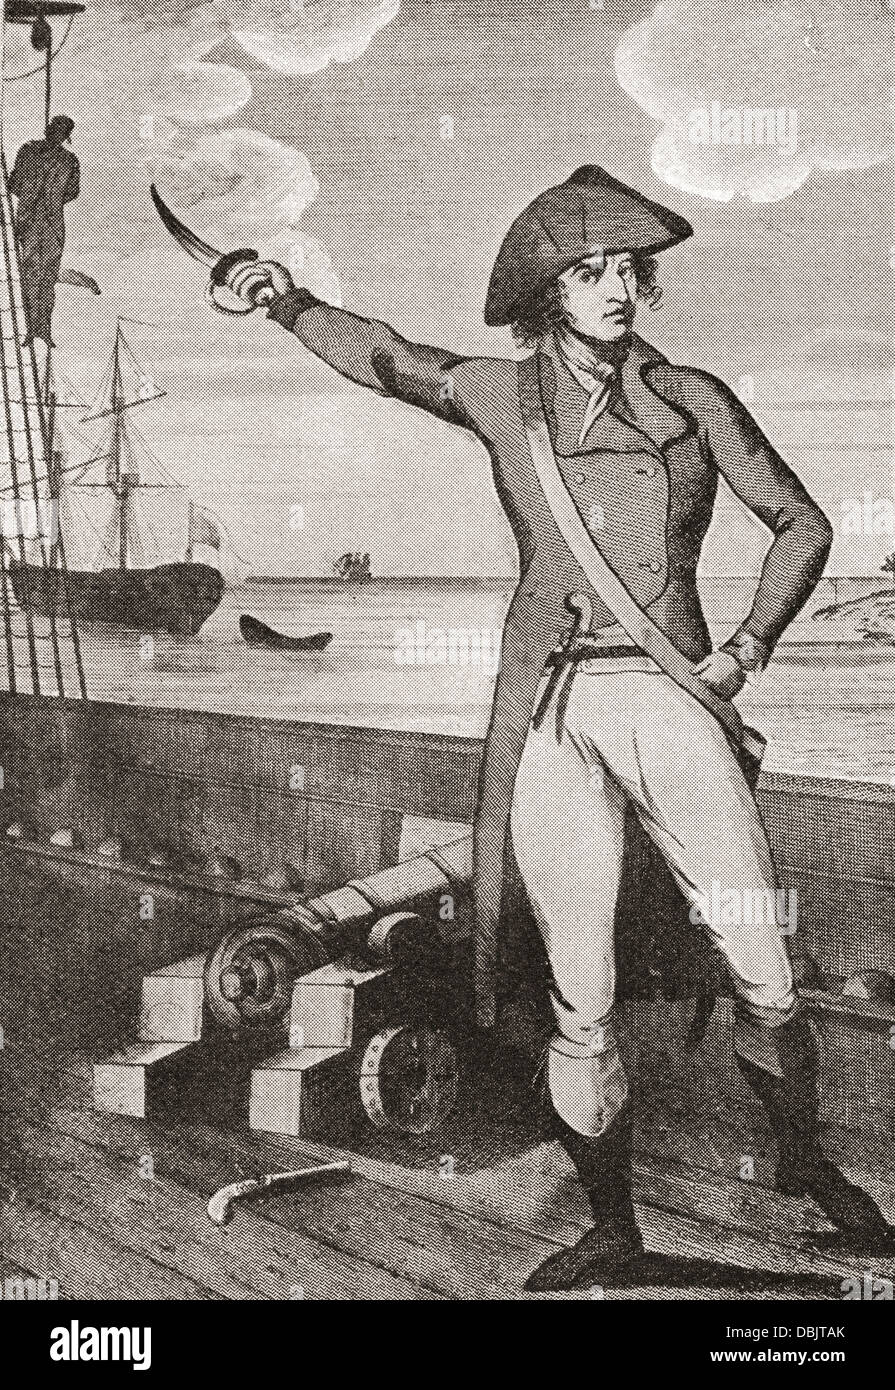 Richard Parker, 1767 – 1797. English sailor executed for his part in the so-called 'Floating Republic', naval mutiny. Stock Photo